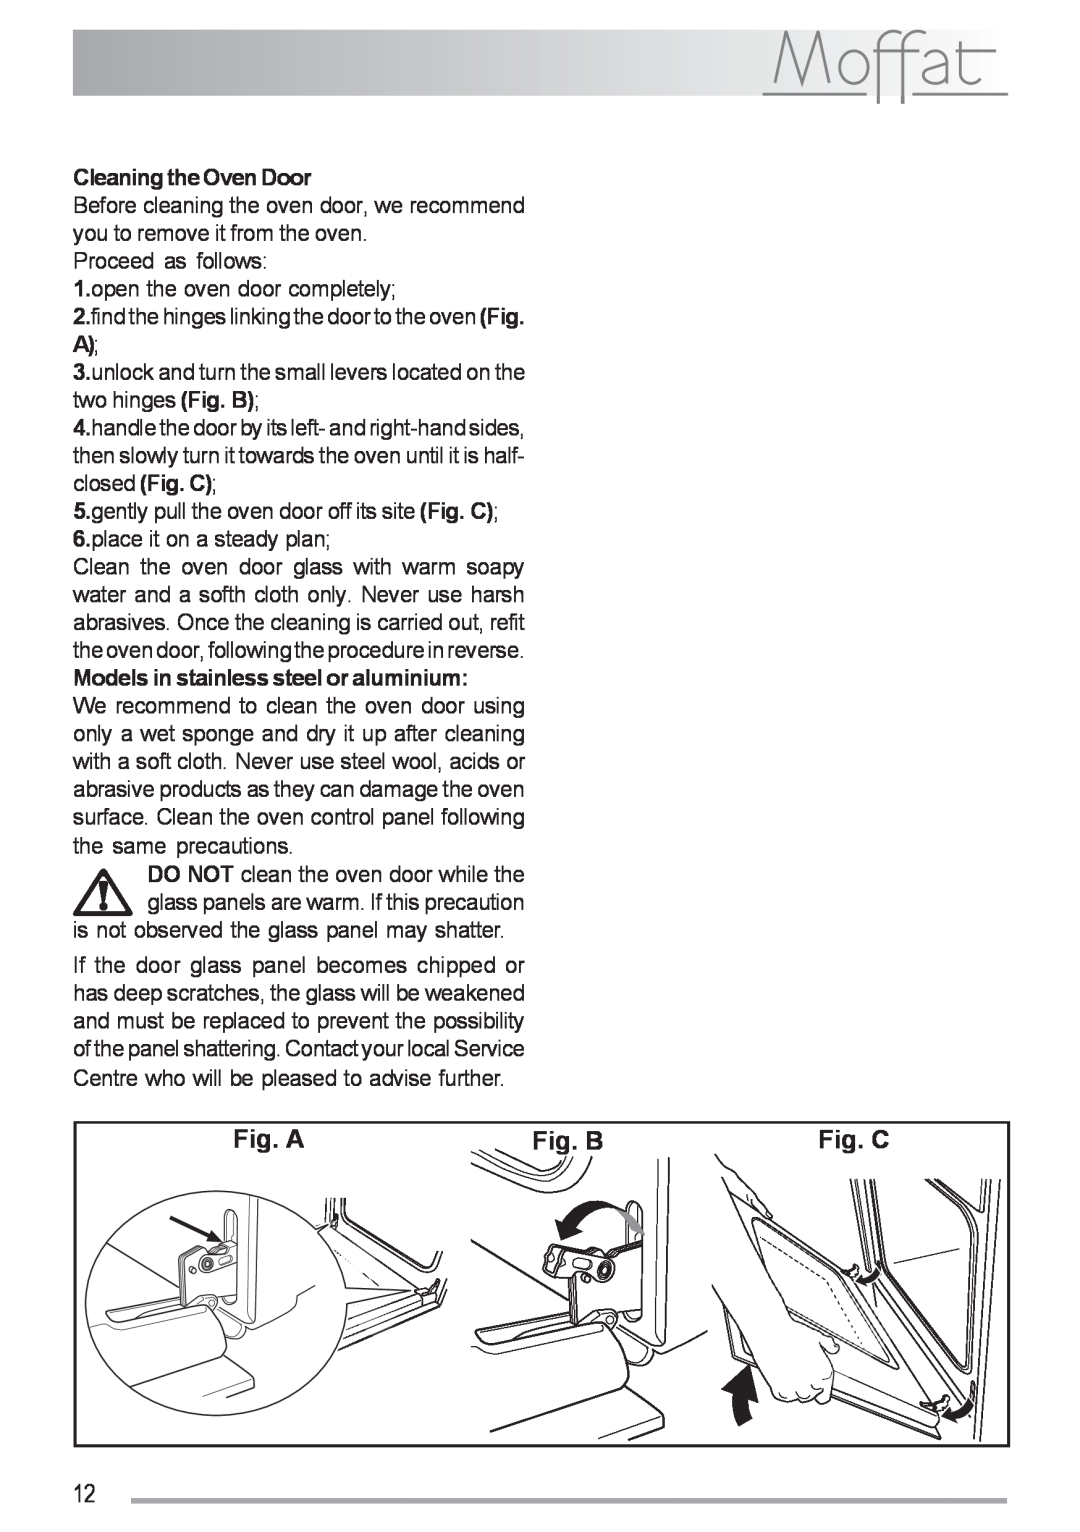 Moffat MSF 611 manual Fig. A, Fig. B, Fig. C, Cleaning the Oven Door, Models in stainless steel or aluminium 